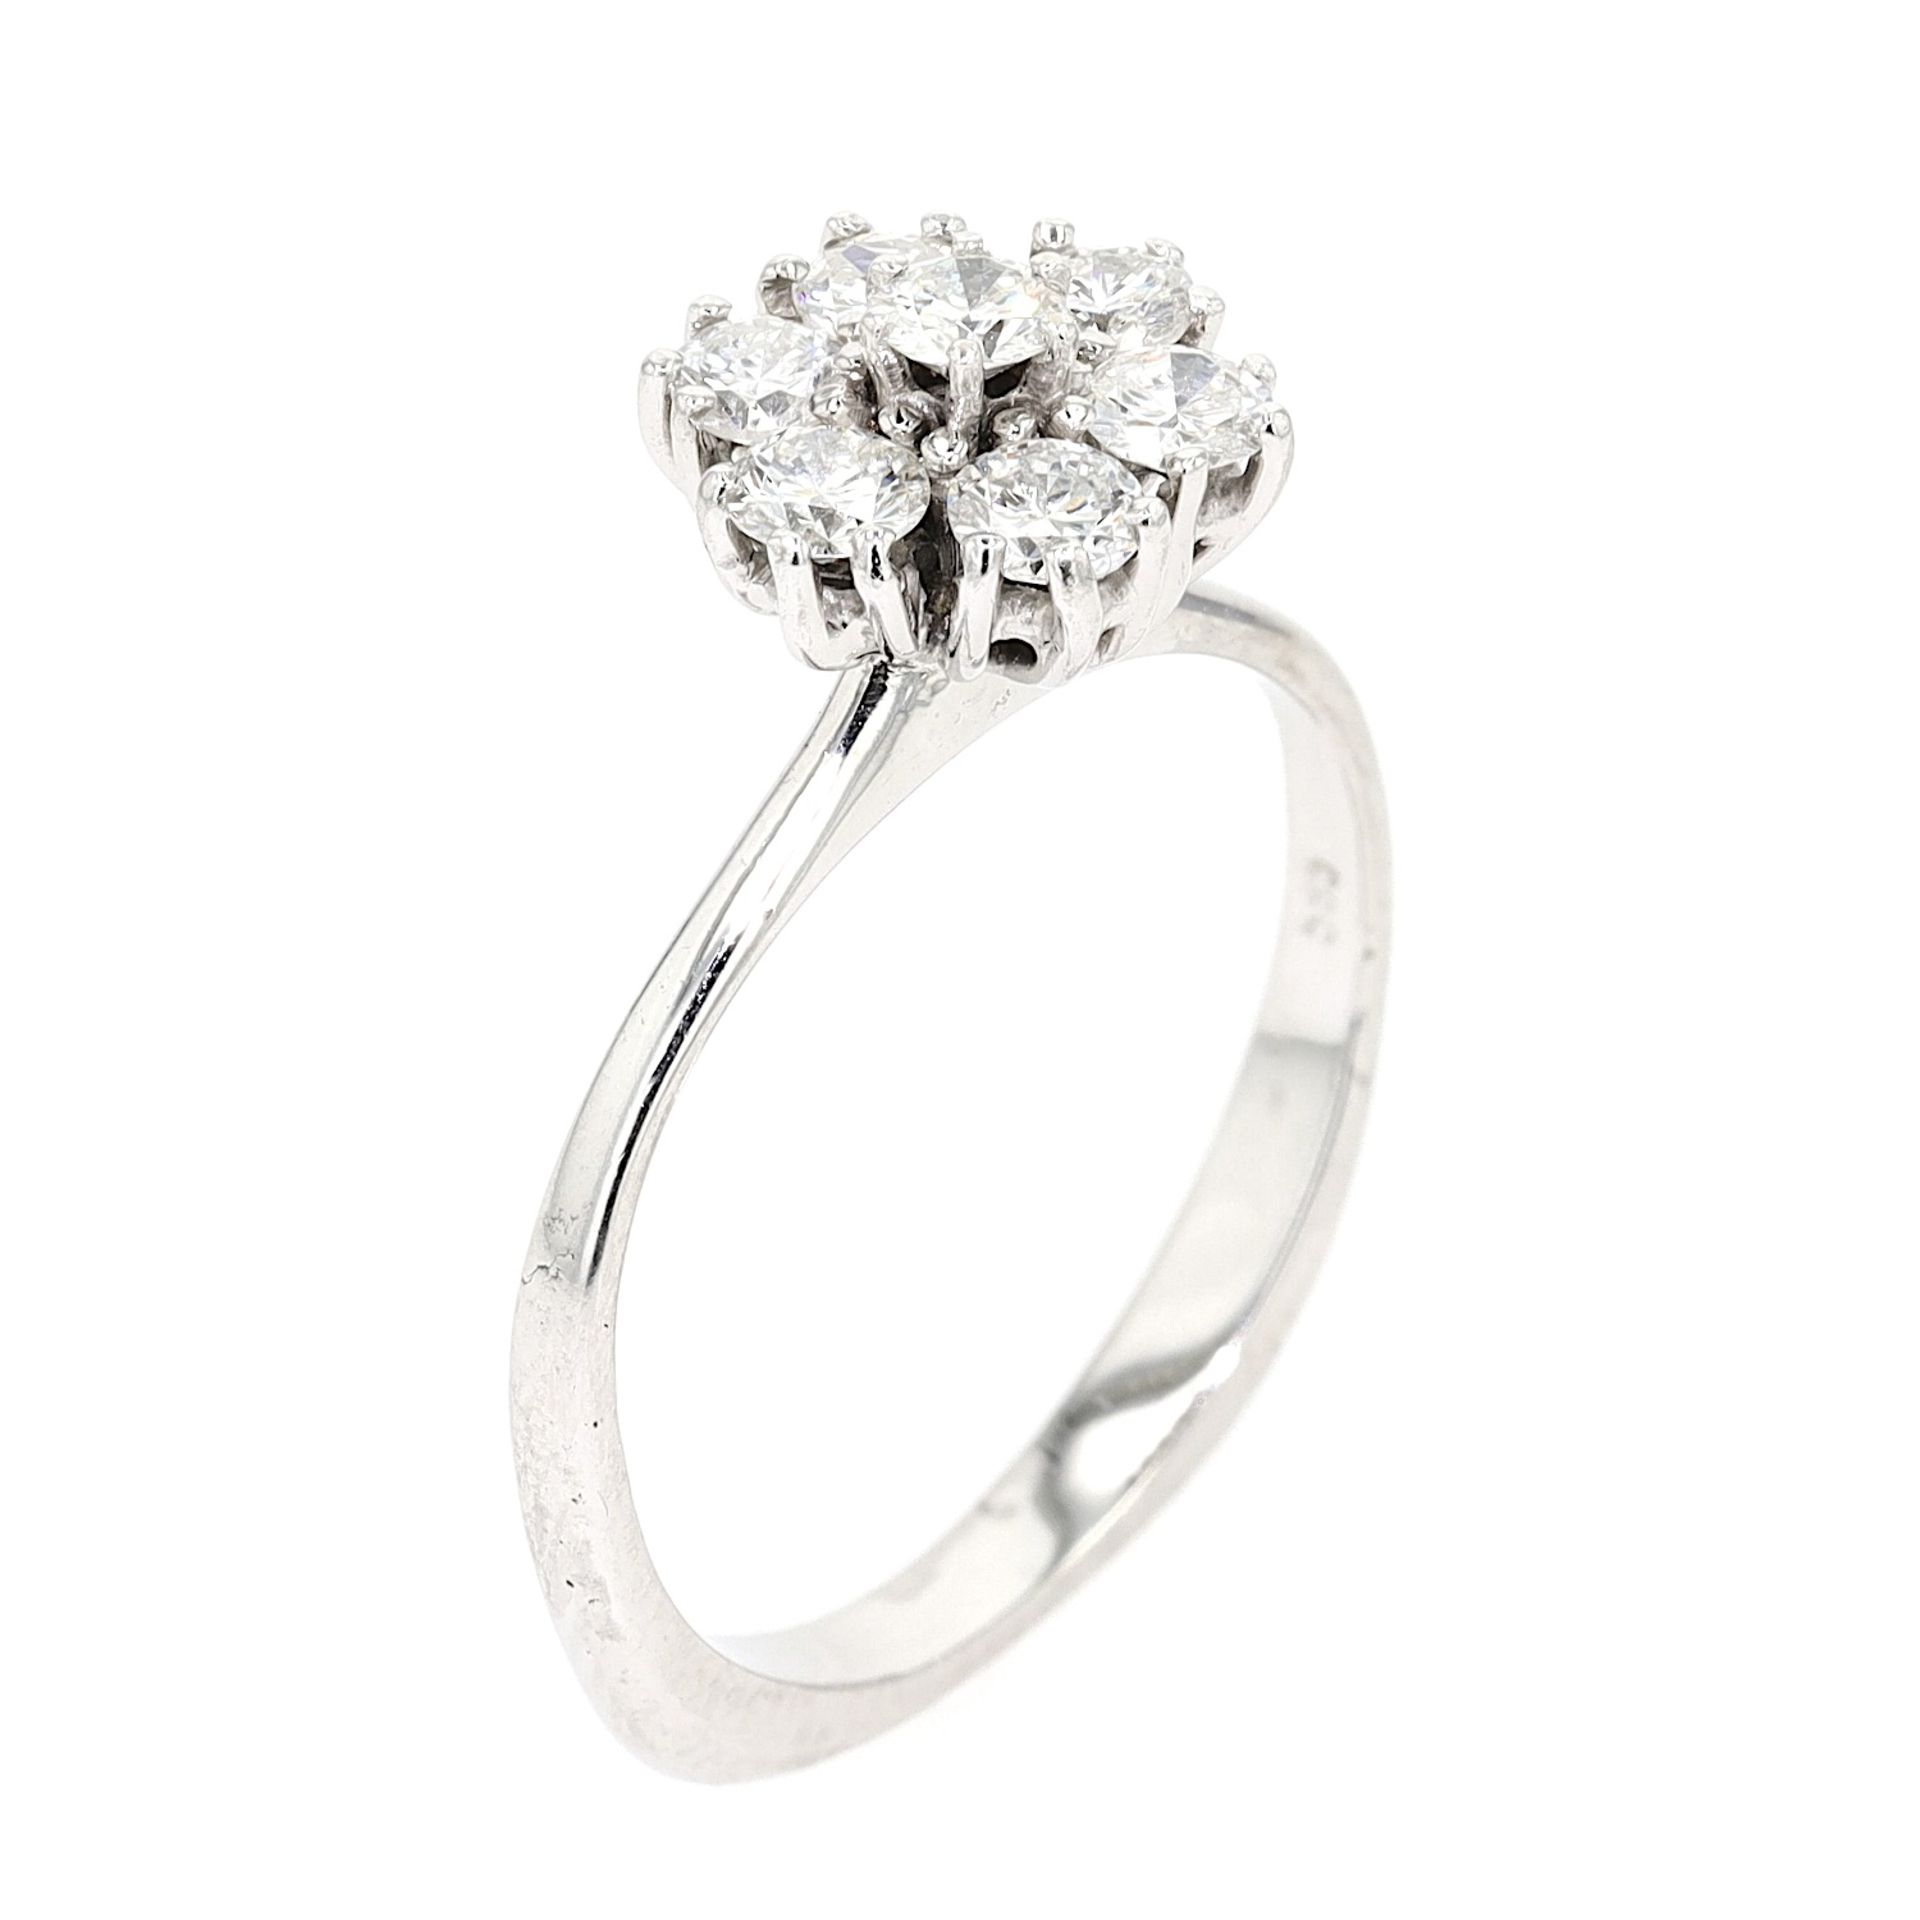 Ring 585 white gold, ca. 0.85 ct brilliants - Image 6 of 6